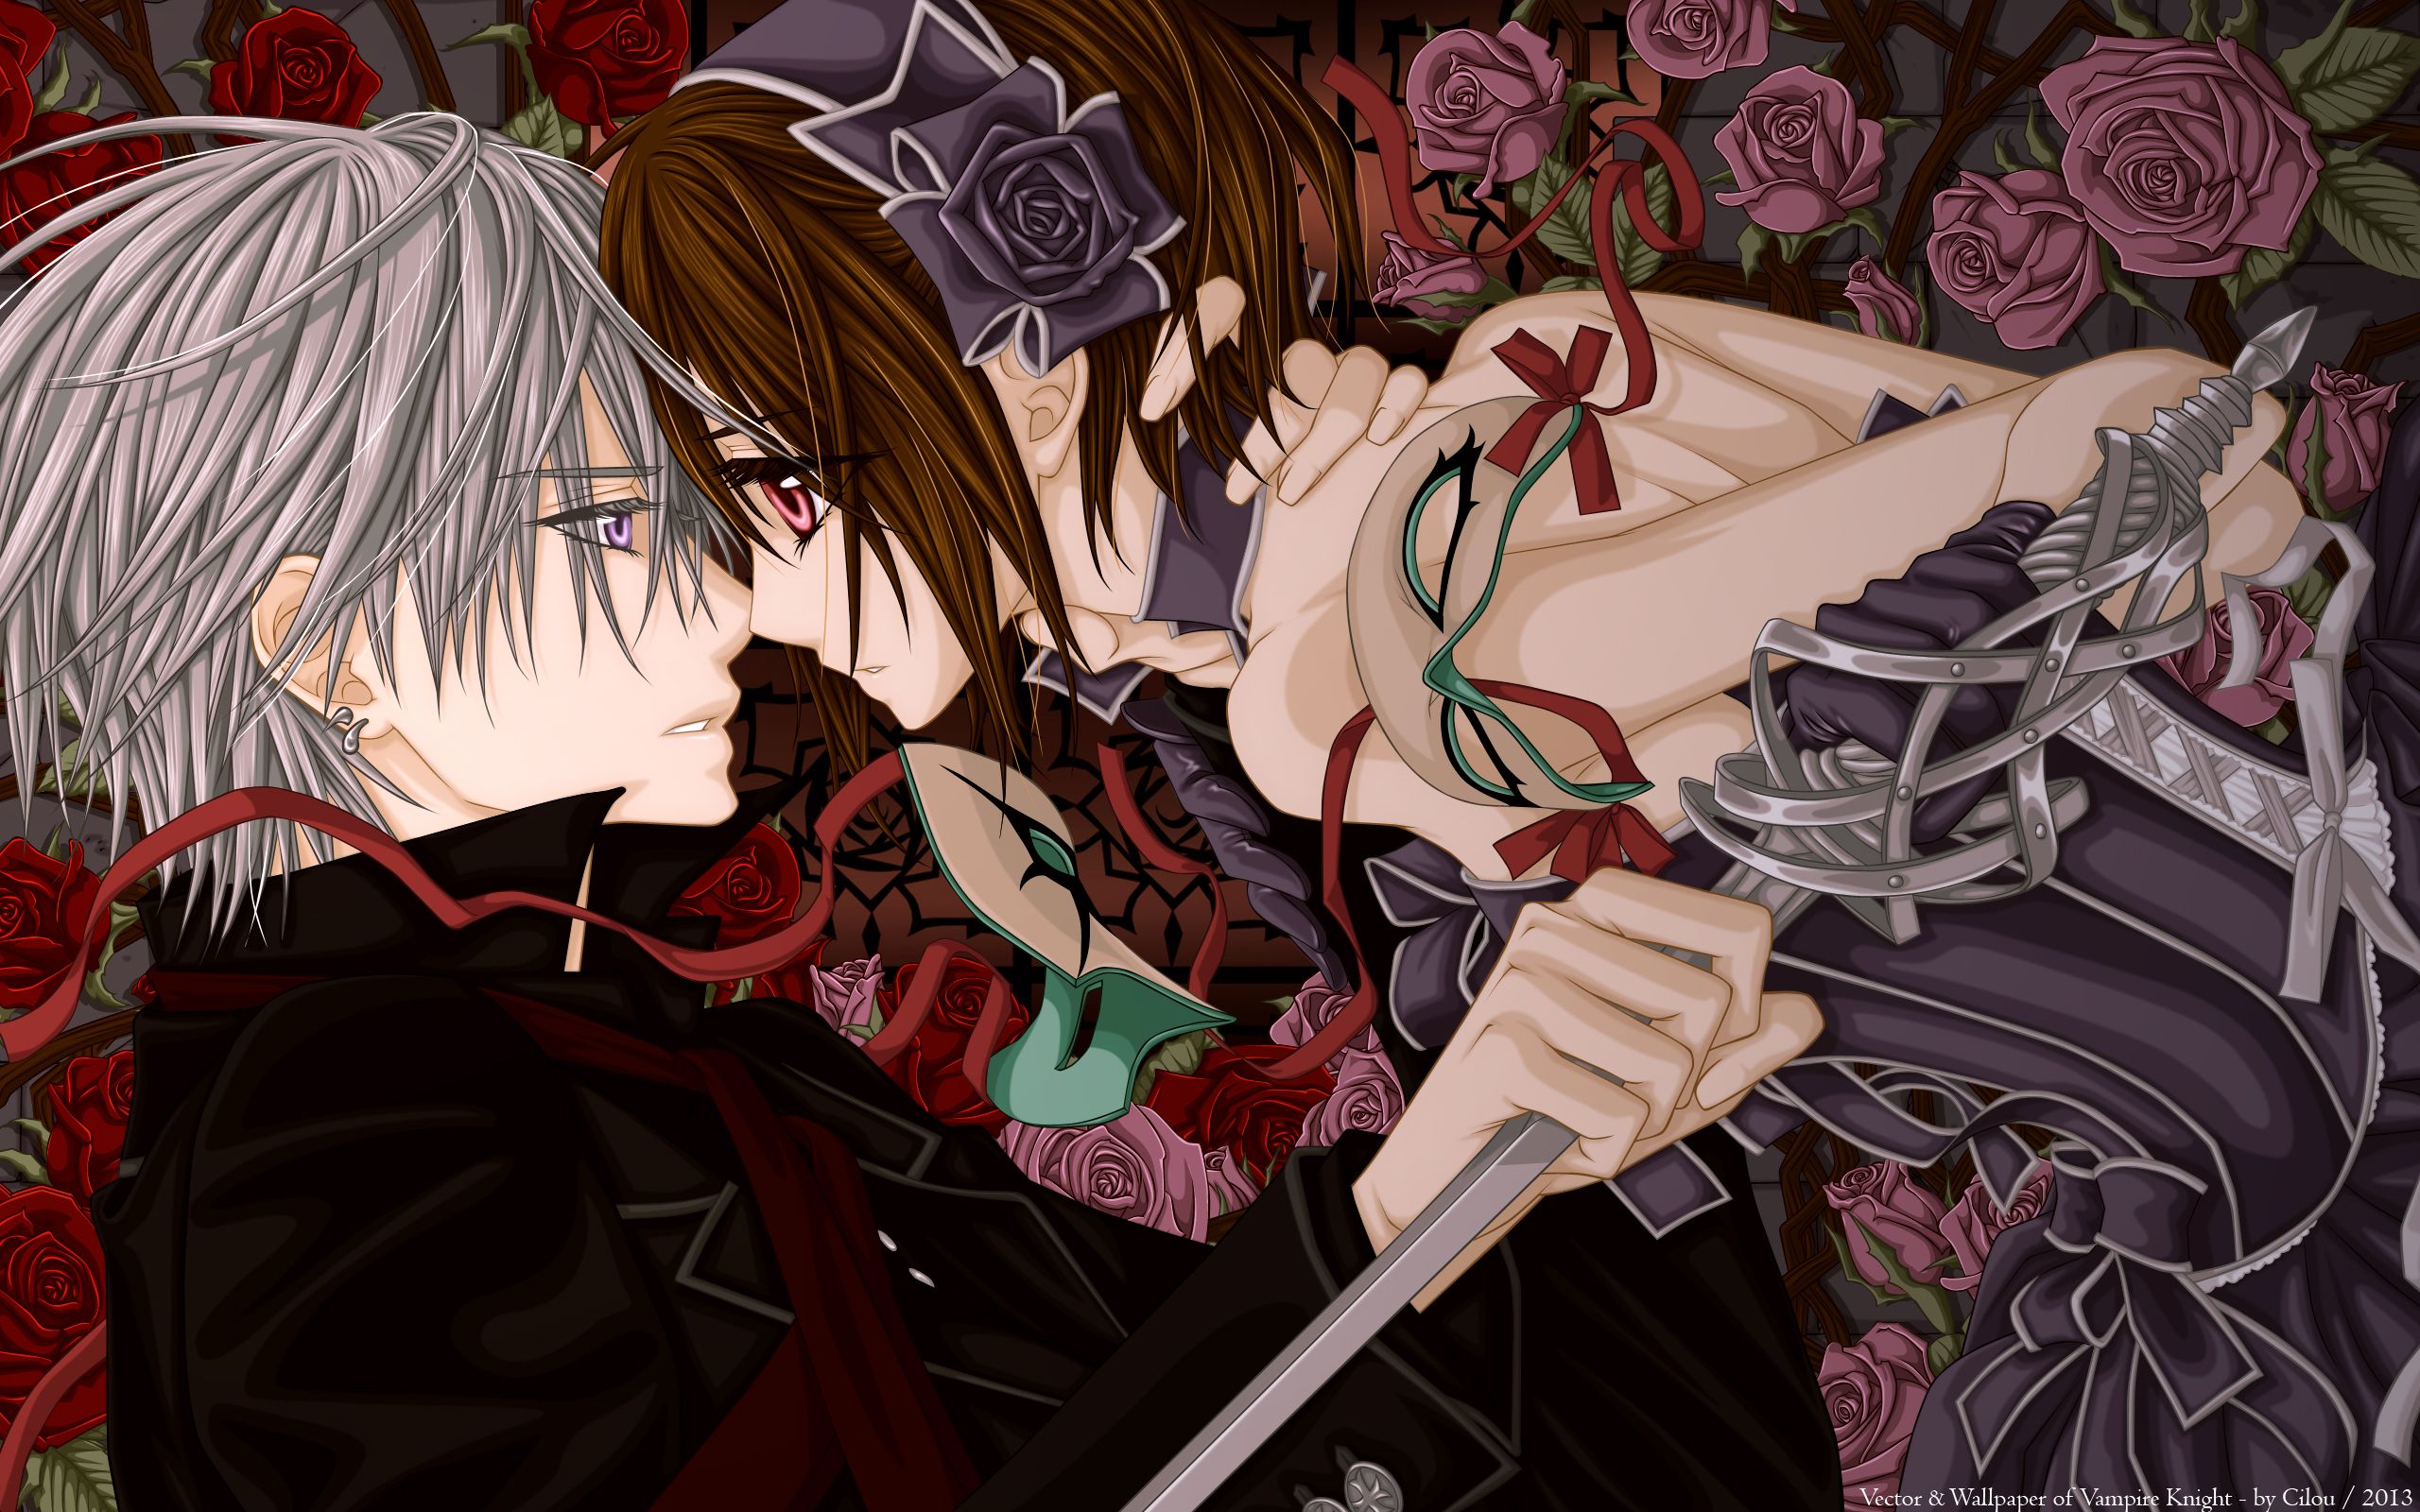 Vampire Anime Couple Wallpapers - Wallpaper Cave